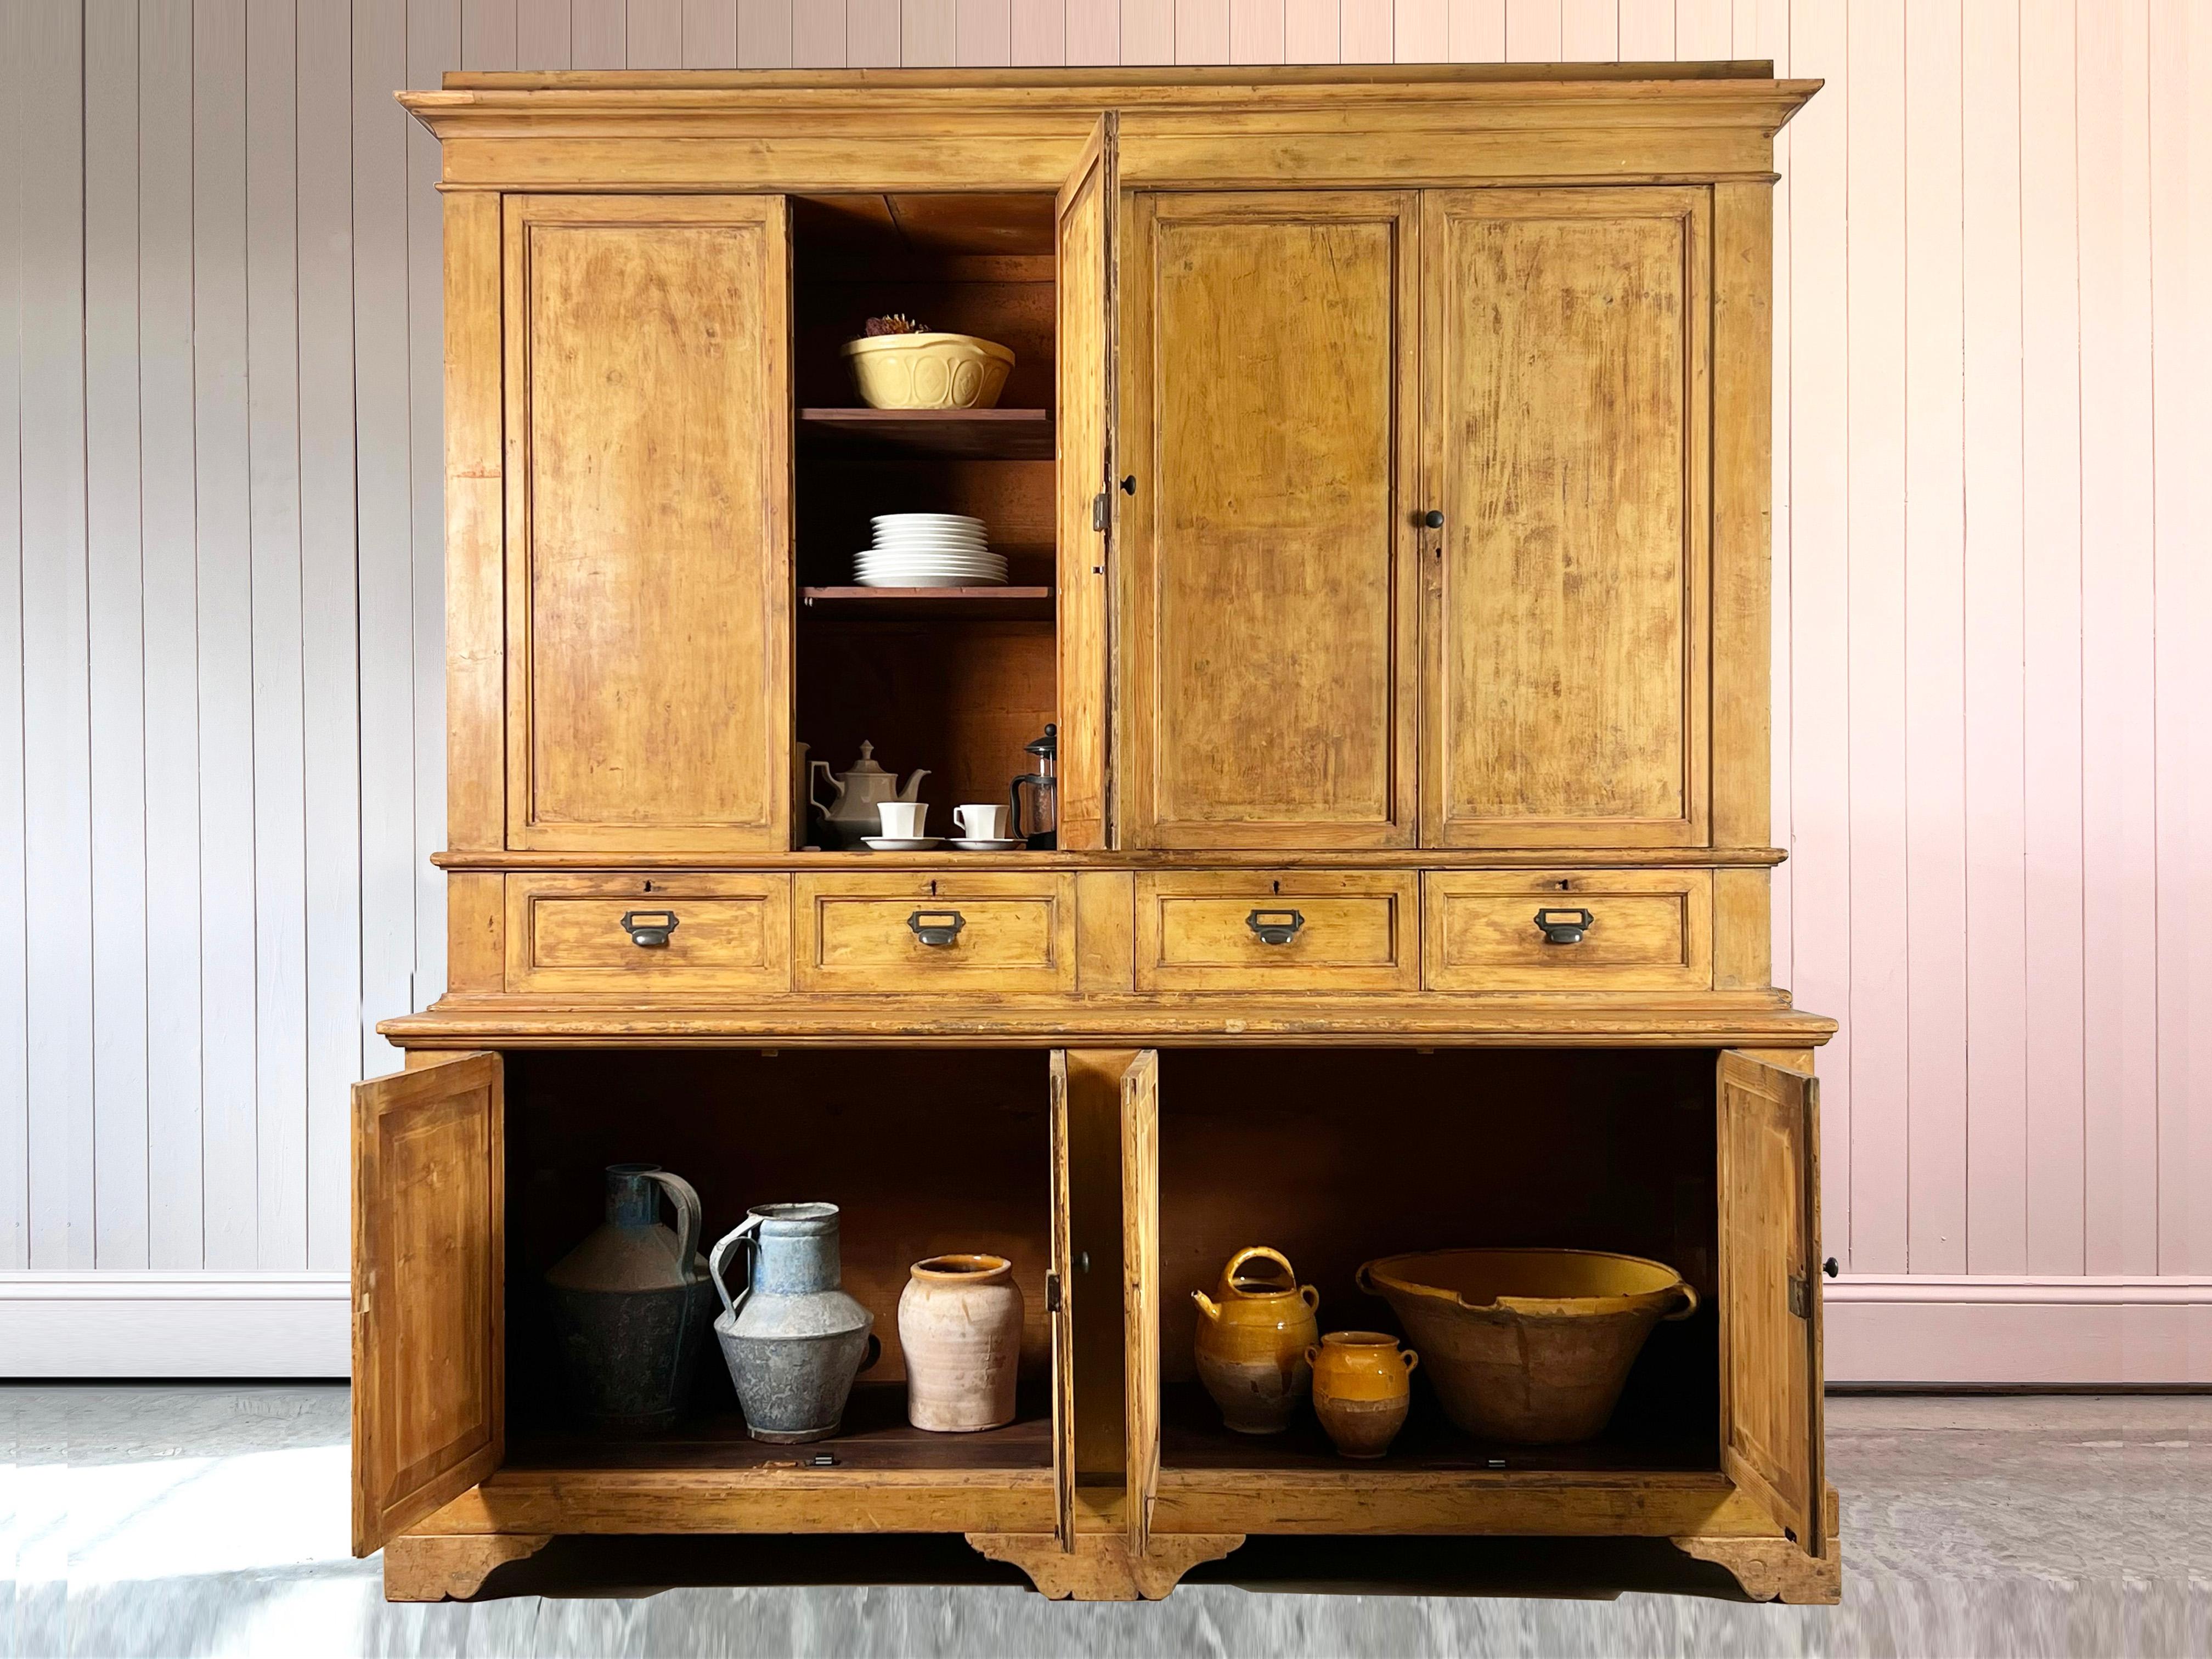 This Late 19th Century cupboard was sourced from some offices in Bologna.

It is a very handsome piece of furniture with rather Georgian proportions.  It is painted pine with lots of natural wear and patina.

The inside was originally fitted out